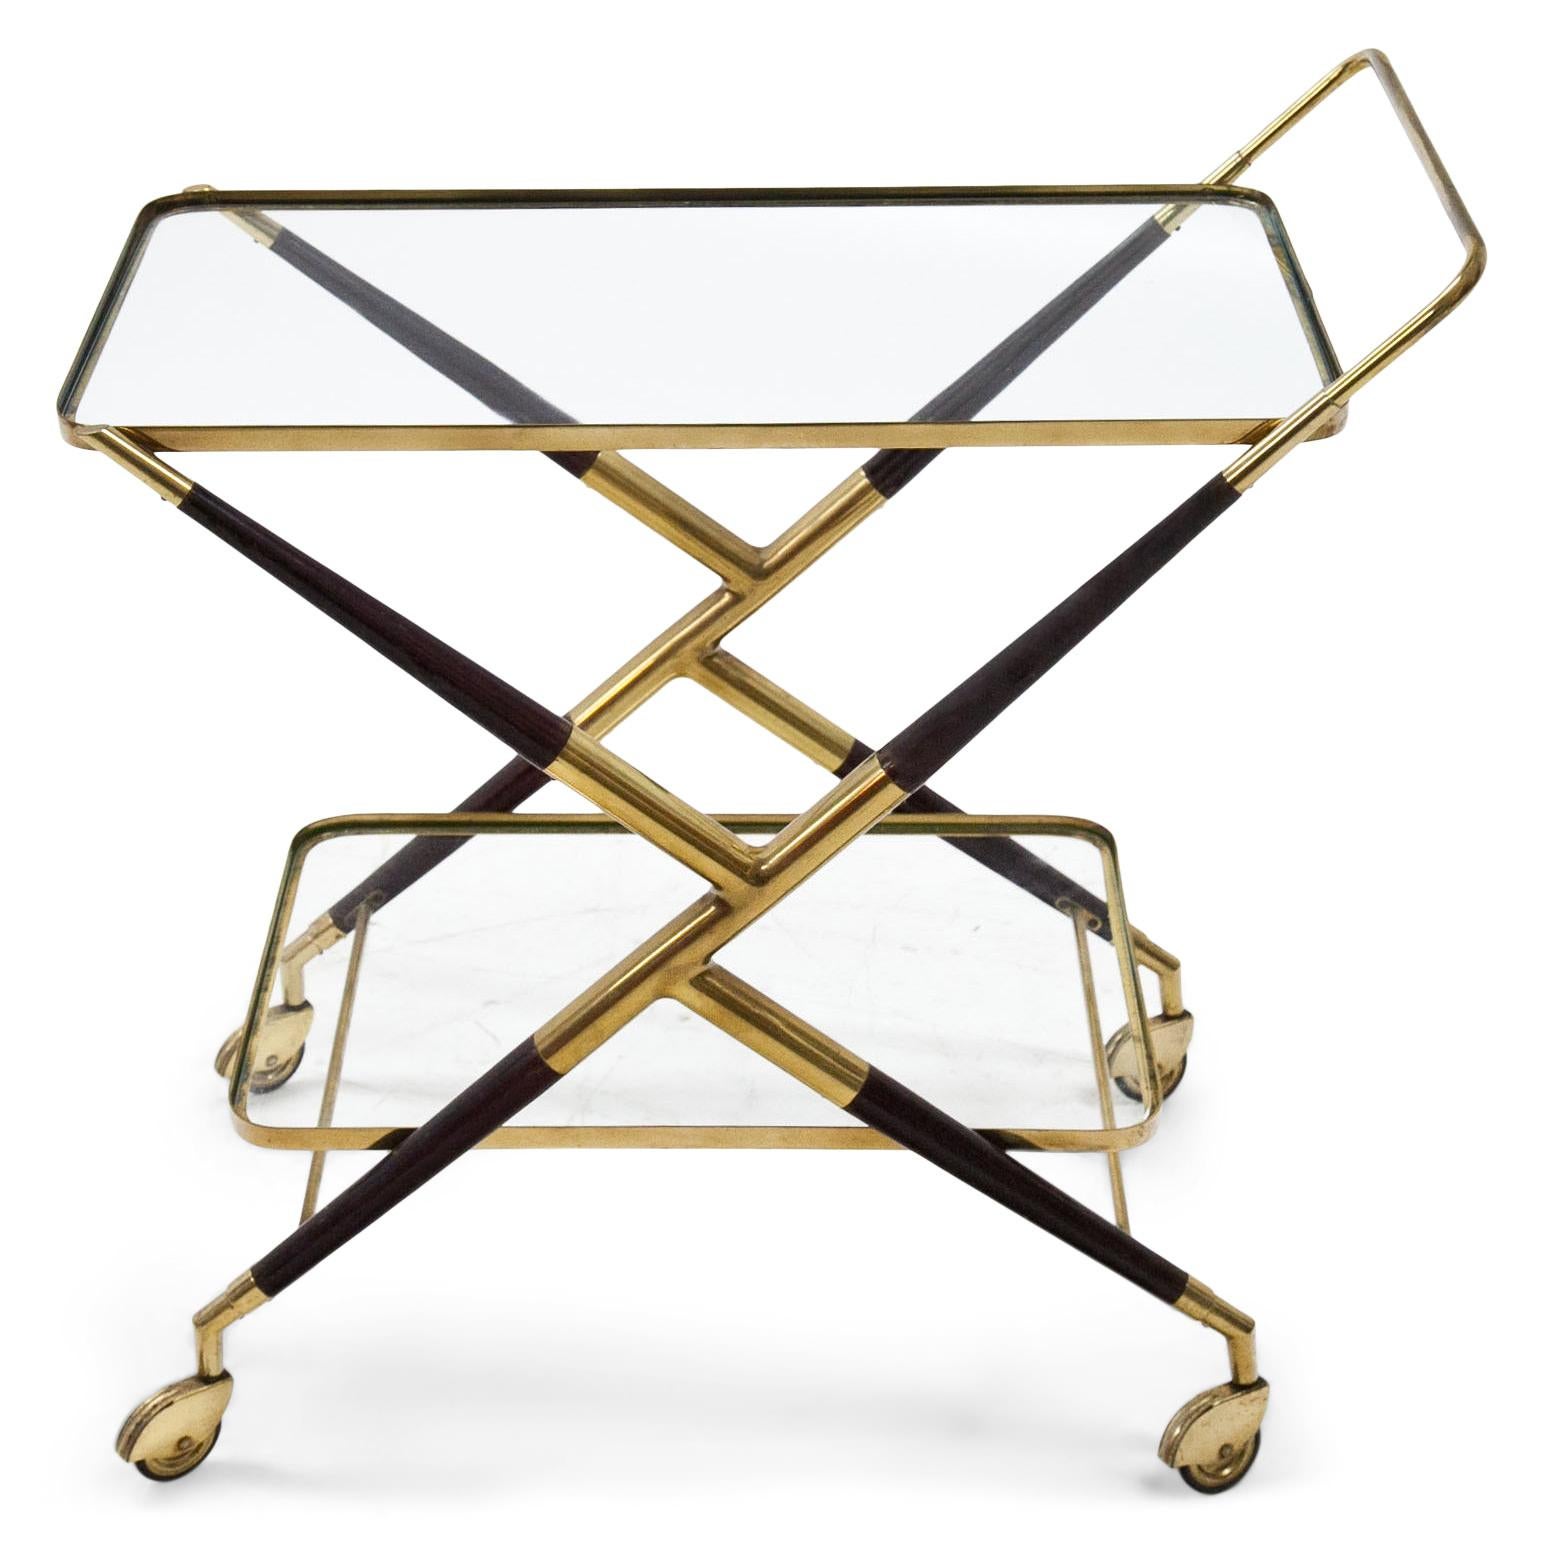 Bar cart with a wood and brass frame and two shelves with glass panes. The brass shows signs of age and use.